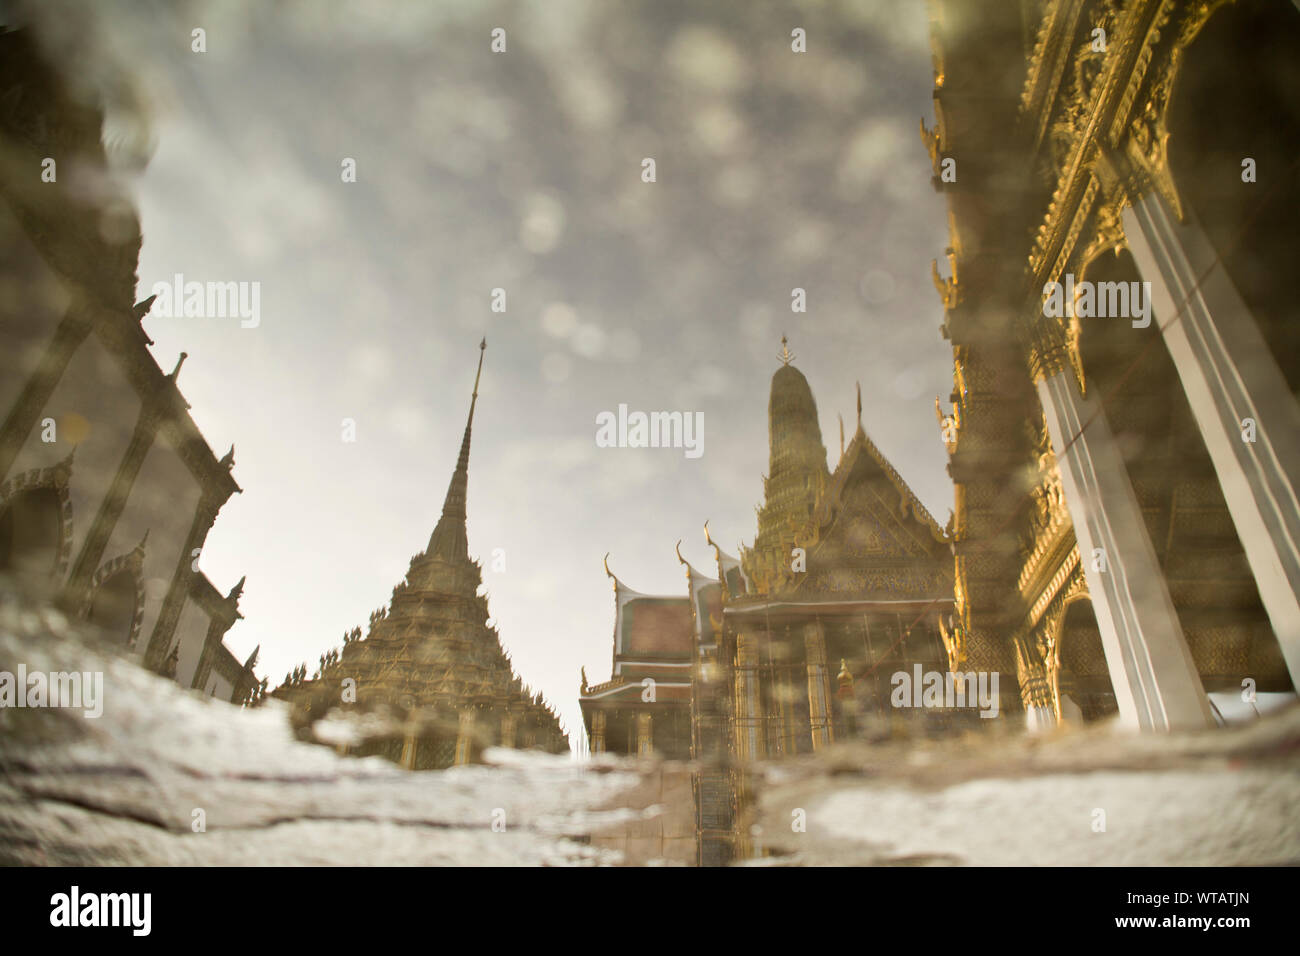 Reflex in a puddle from the Temple of Emerald Buddha Stock Photo